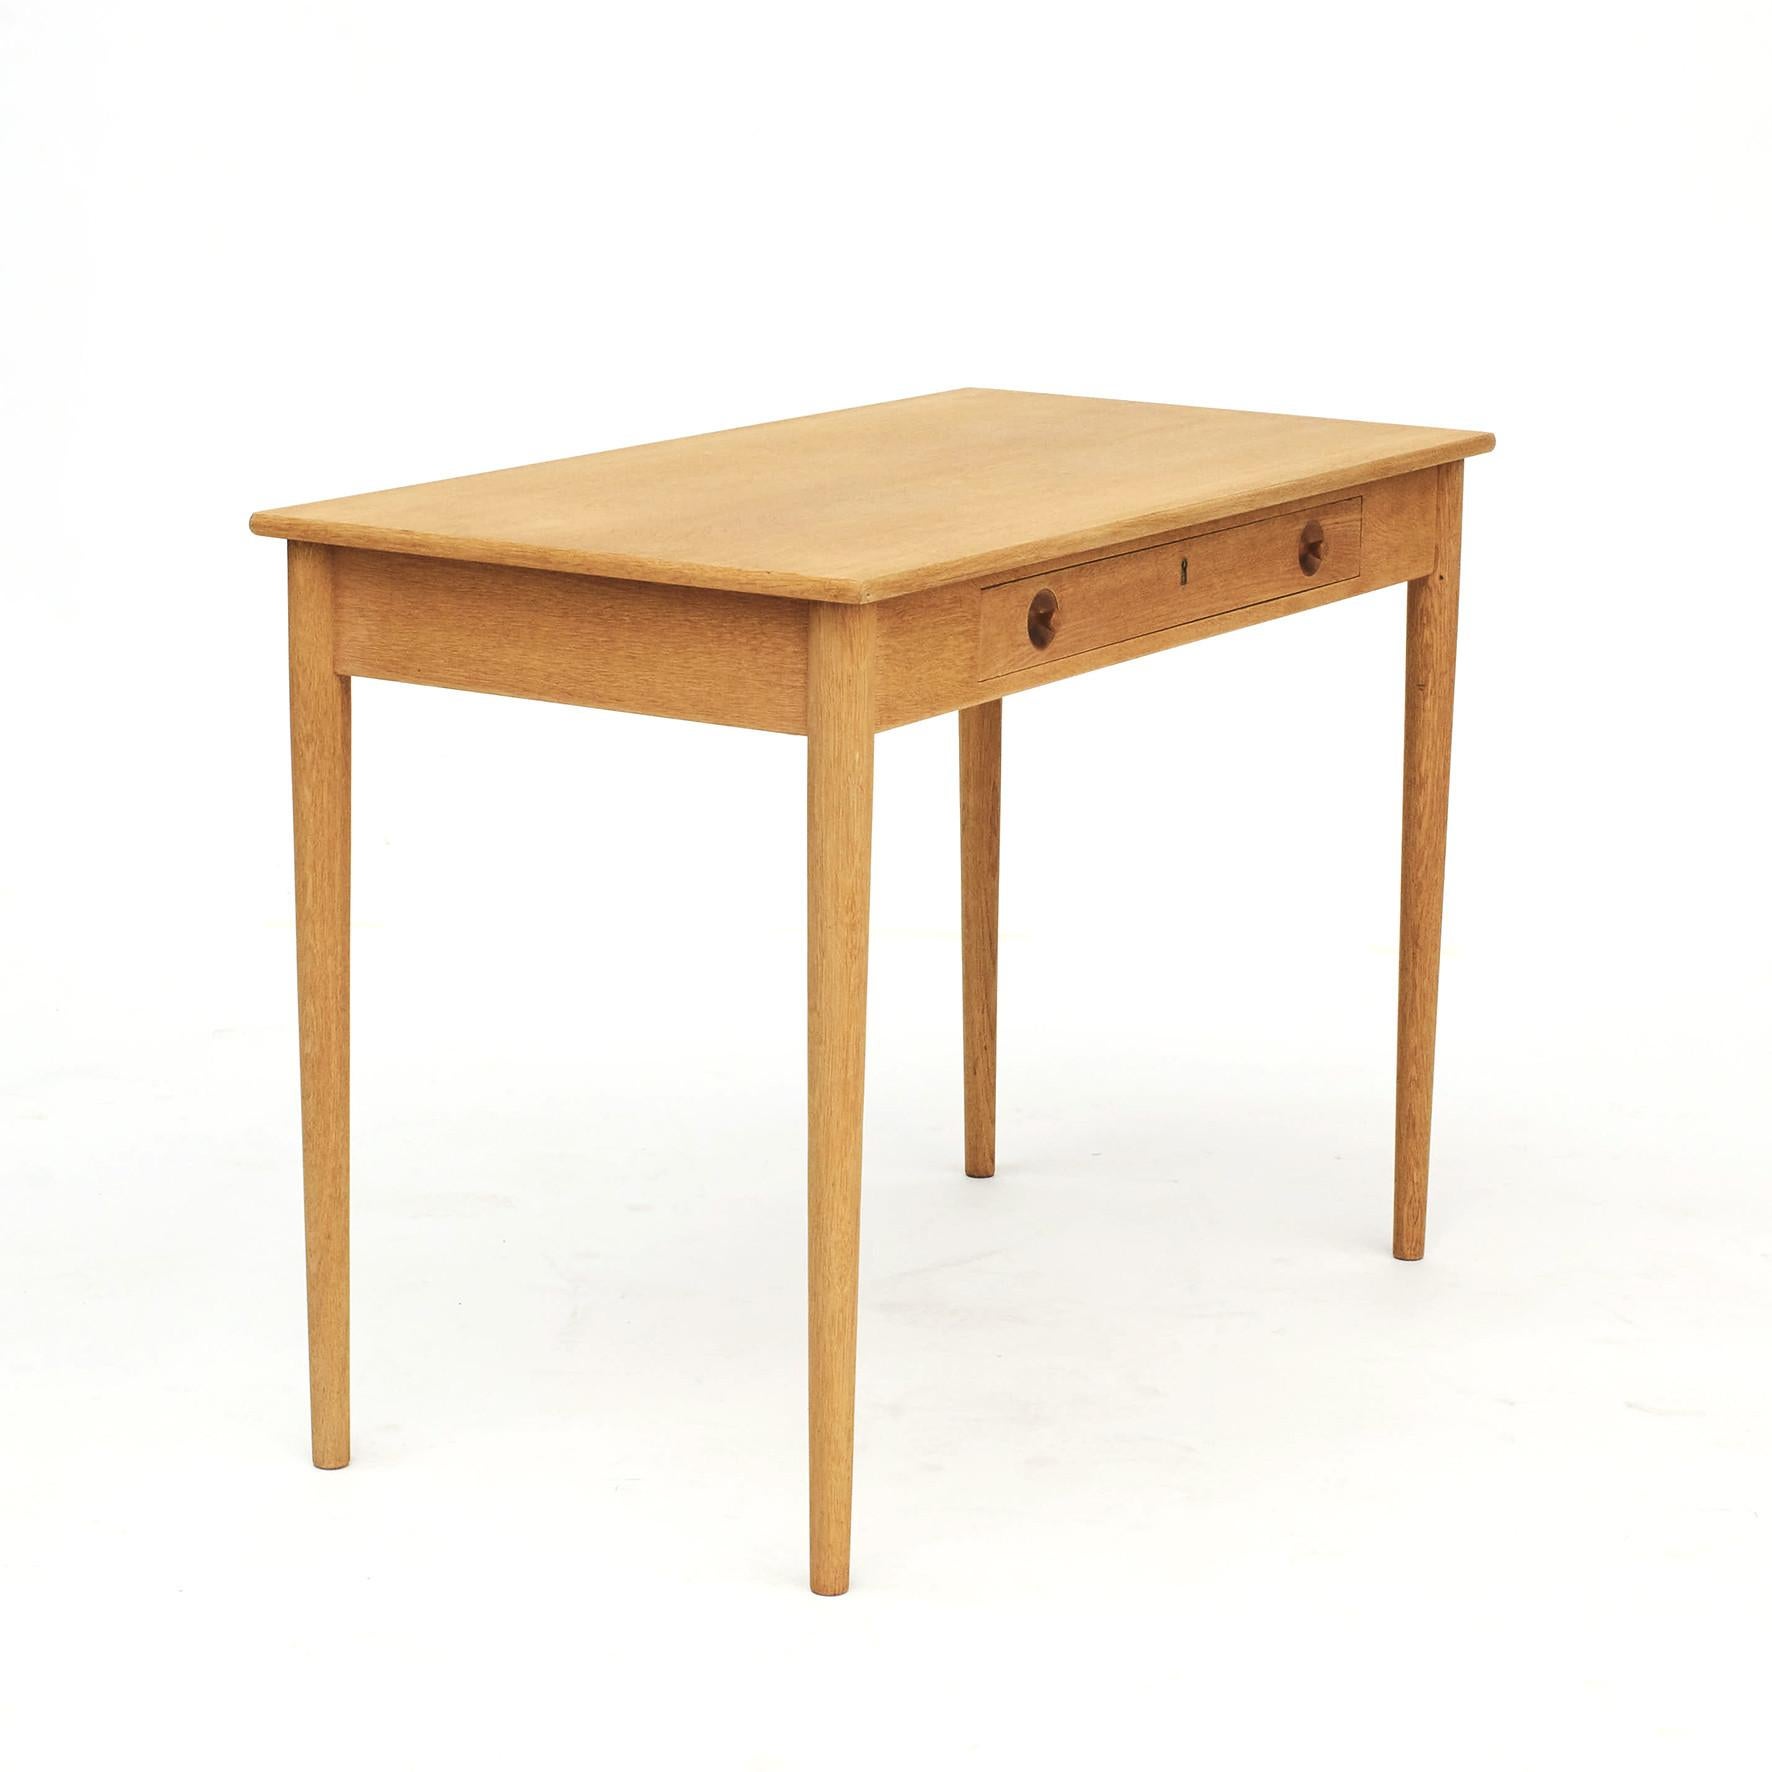 Hans J. Wegner writing desk in oak with one front drawer. Model RY32.
A small and elegant desk designed by Wegner in the 1950s and manufactured by Ry Møbler, Denmark.
HS94016900
In good condition.